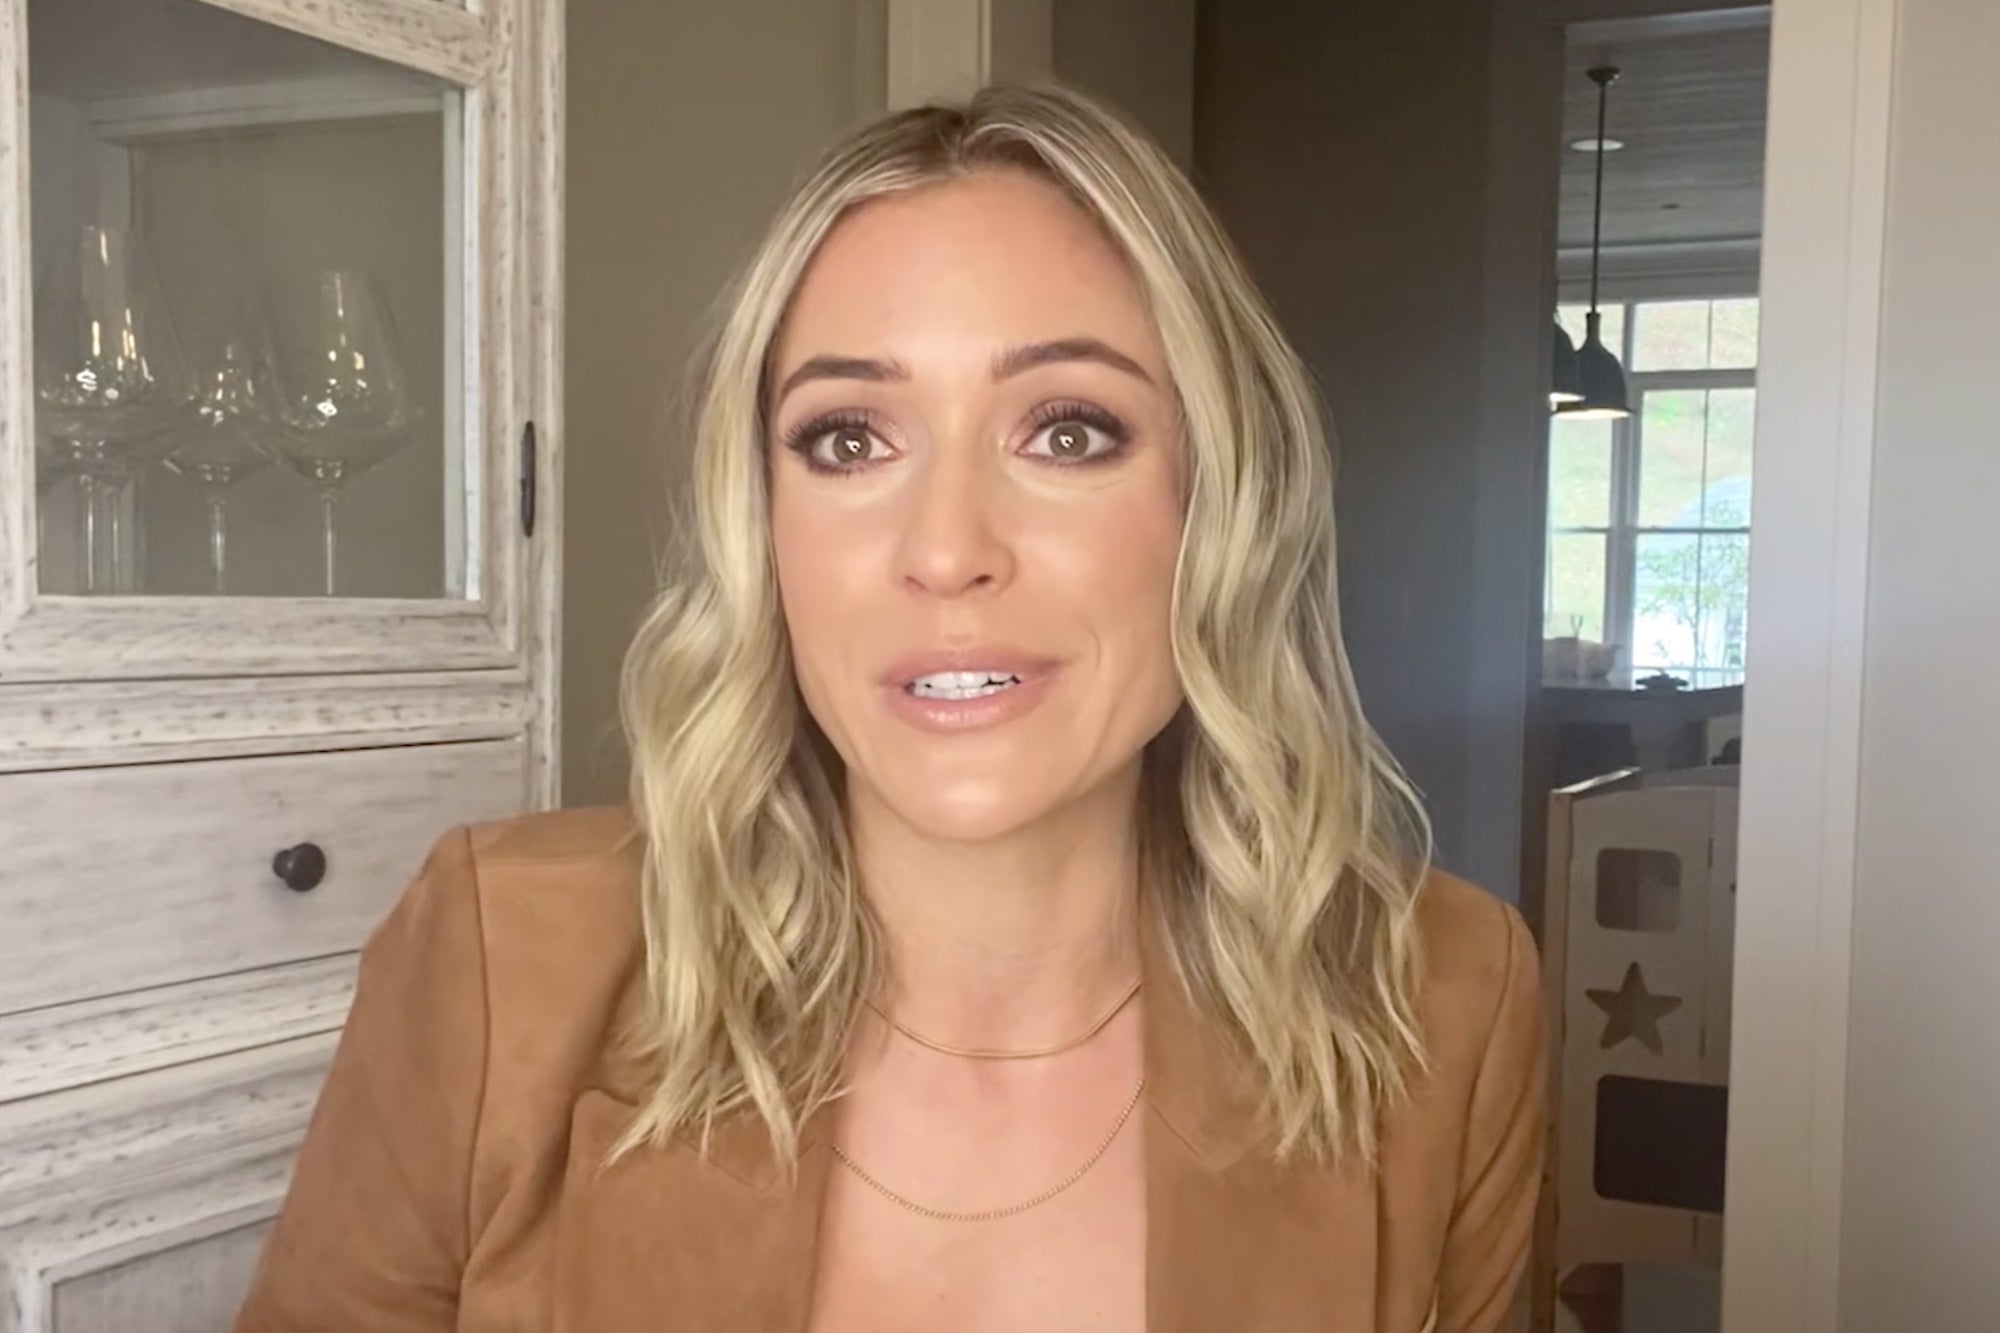 Kristin Cavallari's Advice to Startup Entrepreneurs: 'Go For It, But Be Honest With Yourself'